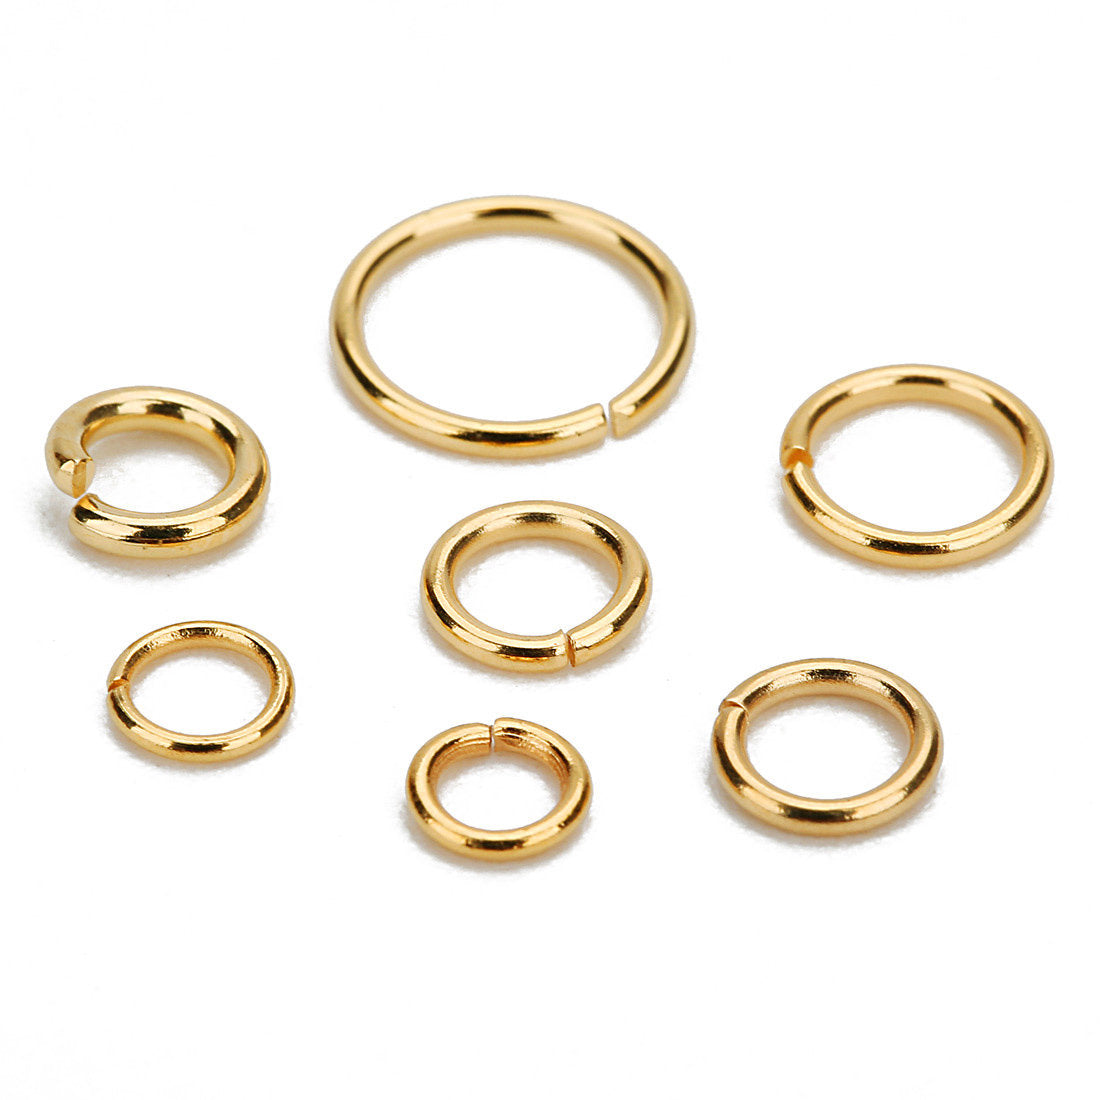 Gold plated stainless steel jump rings 4, 5 or 8mm - 100pcs